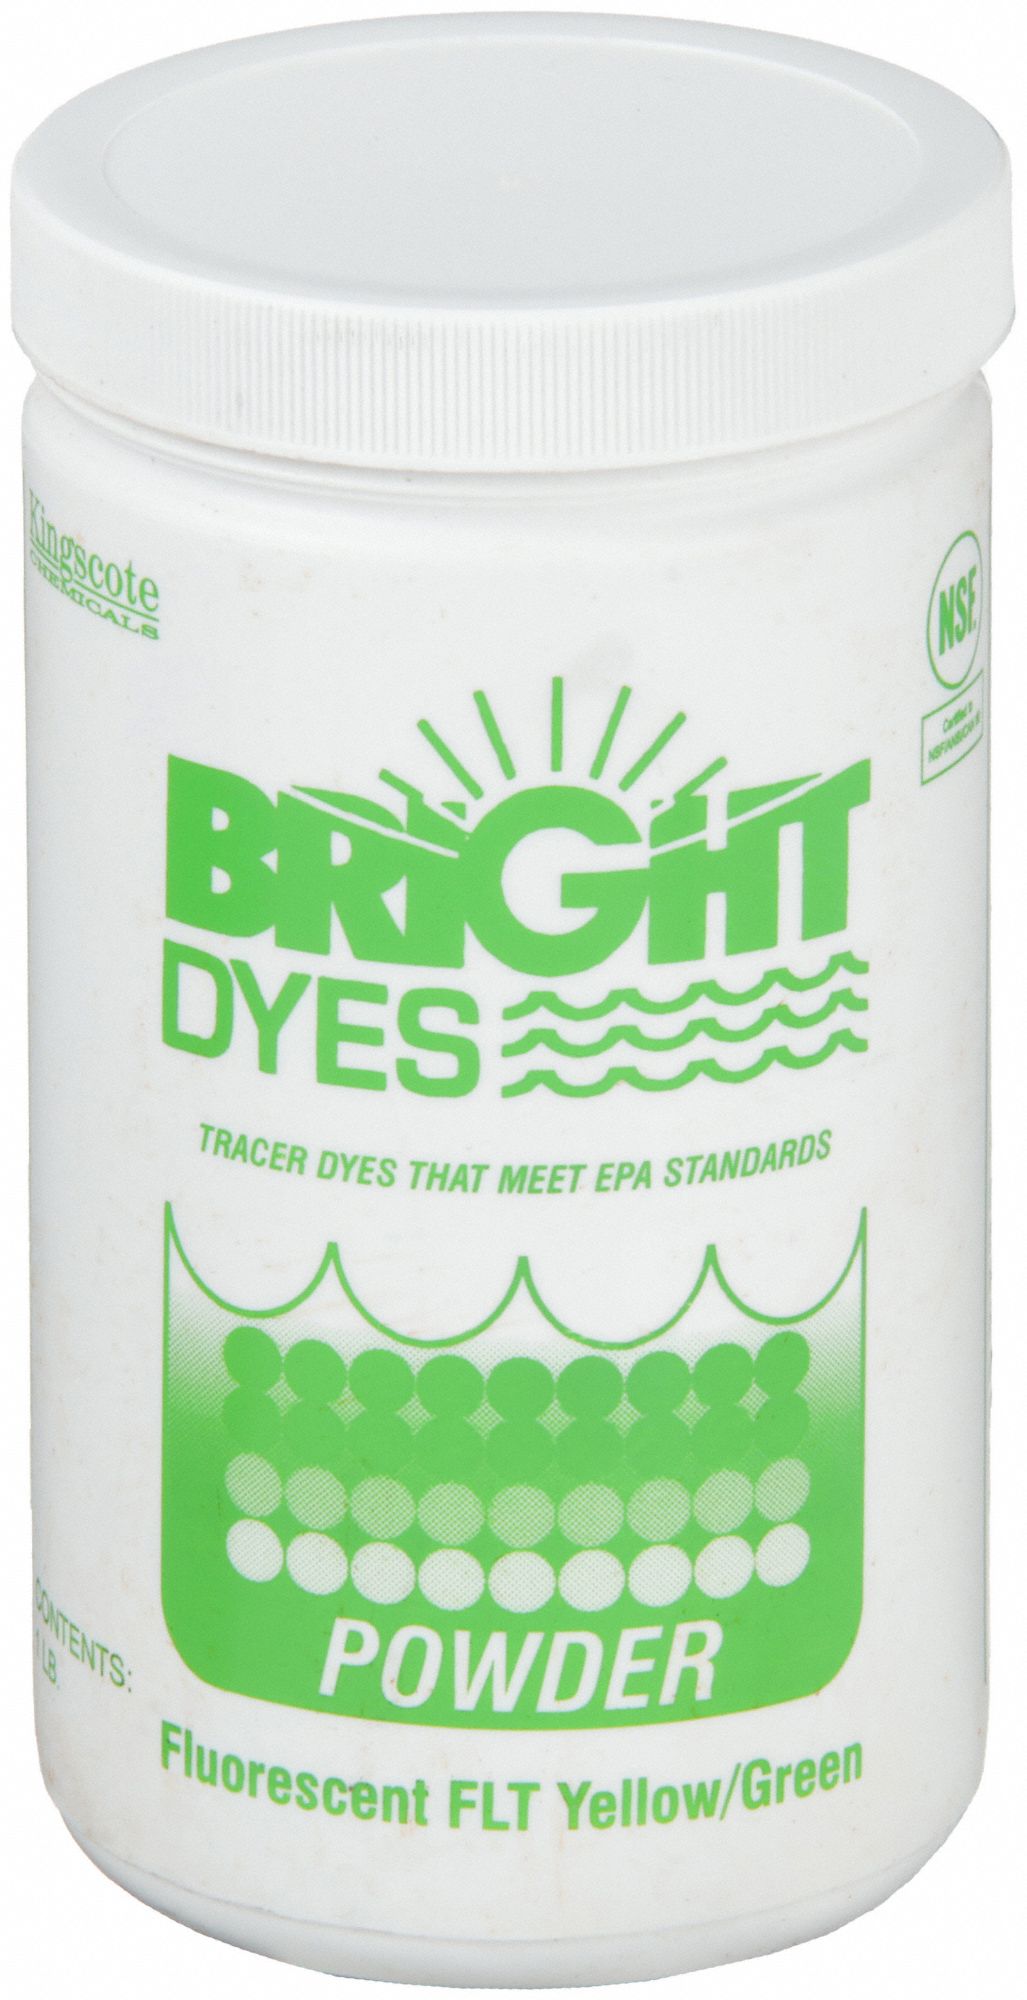 Bright Dyes Fluorescent FLT Yellow/Green Dye Powder - The Drainage Source